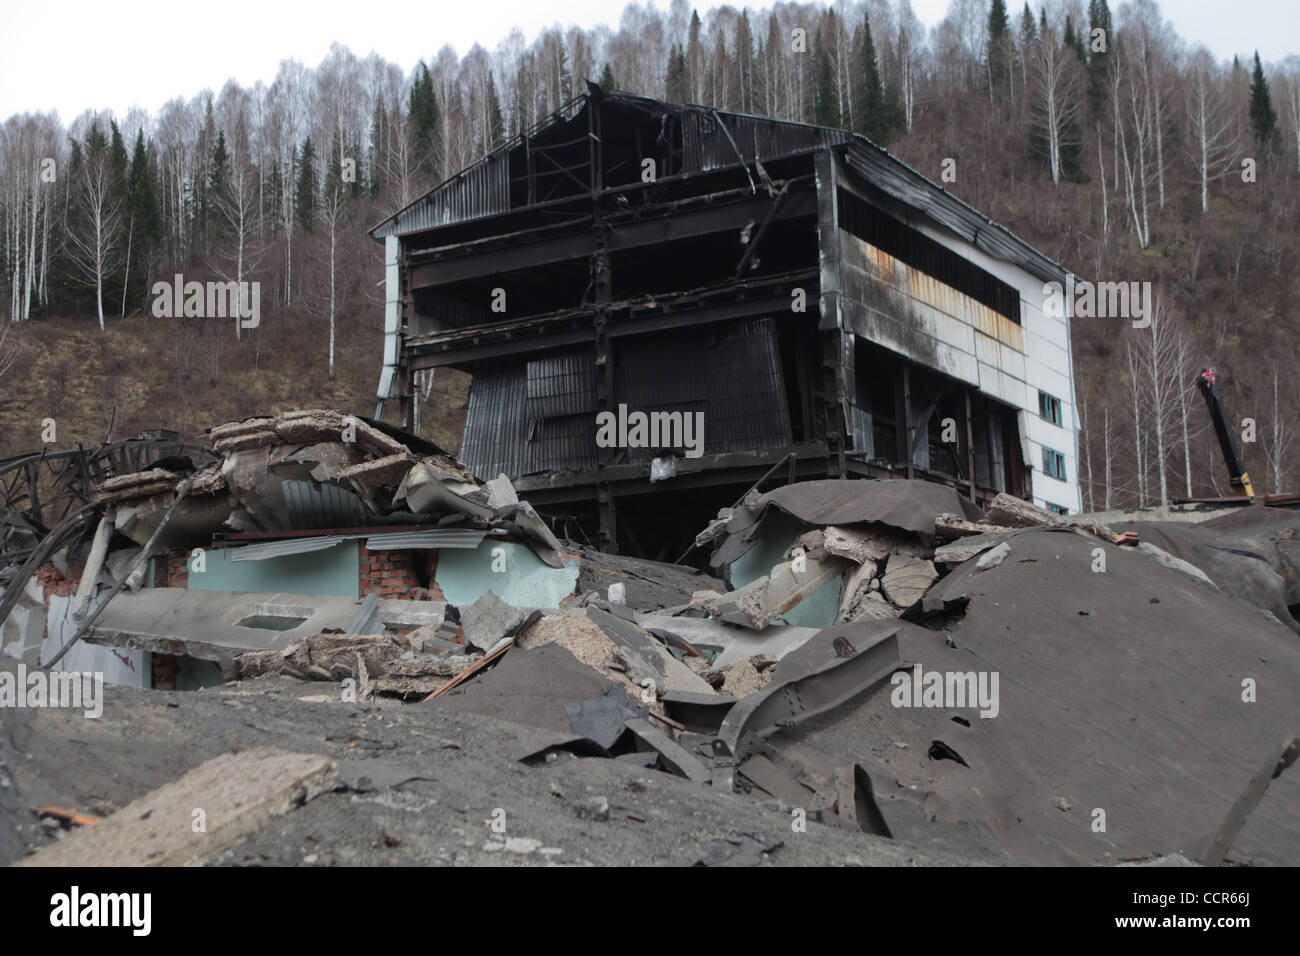 Death toll at Raspadskaya mine of Mezhdurechensk in Kemerovo region of Russia keeps rising, and has reached 60.The other miners who are trapped feared to be dead. Rescue operation is still on.  Pictured: the blasted Raspadskaya mine . Stock Photo